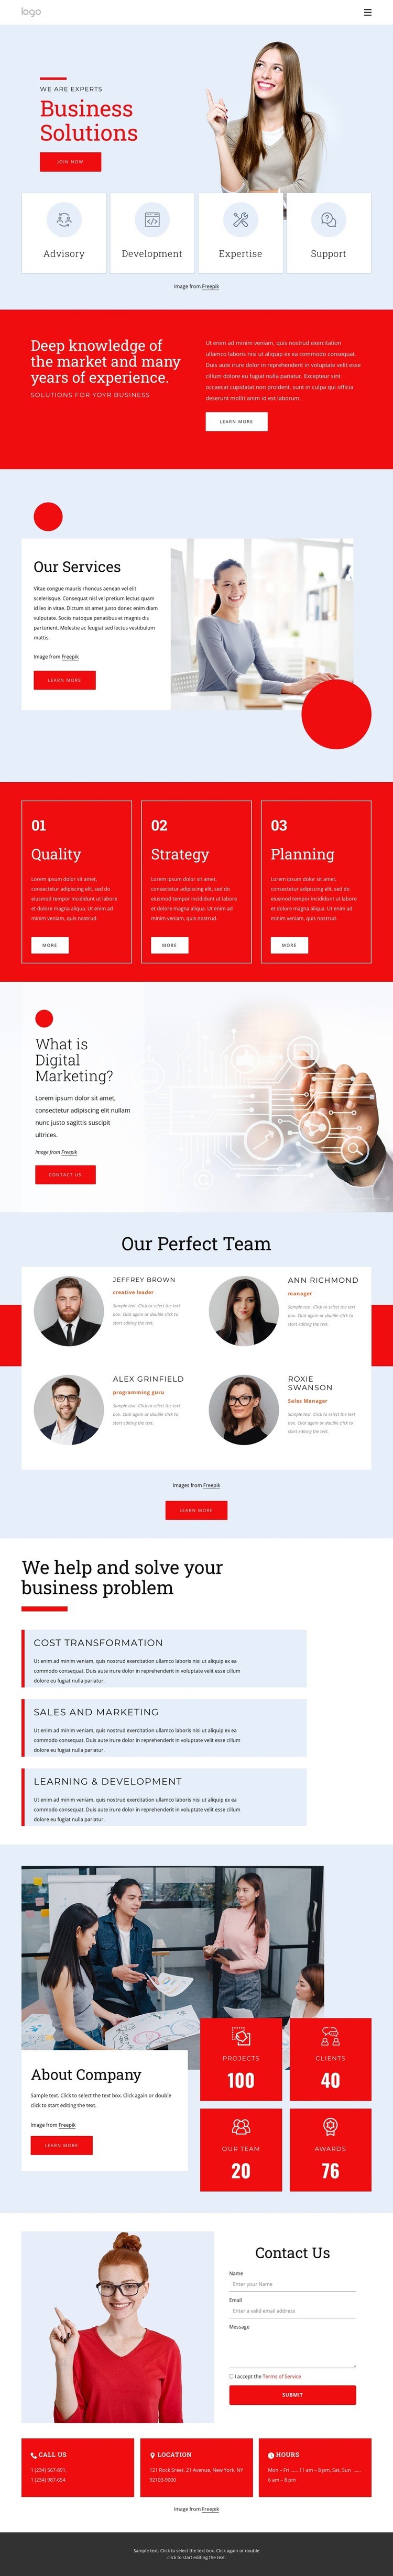 We are experts in business solutions Wix Template Alternative